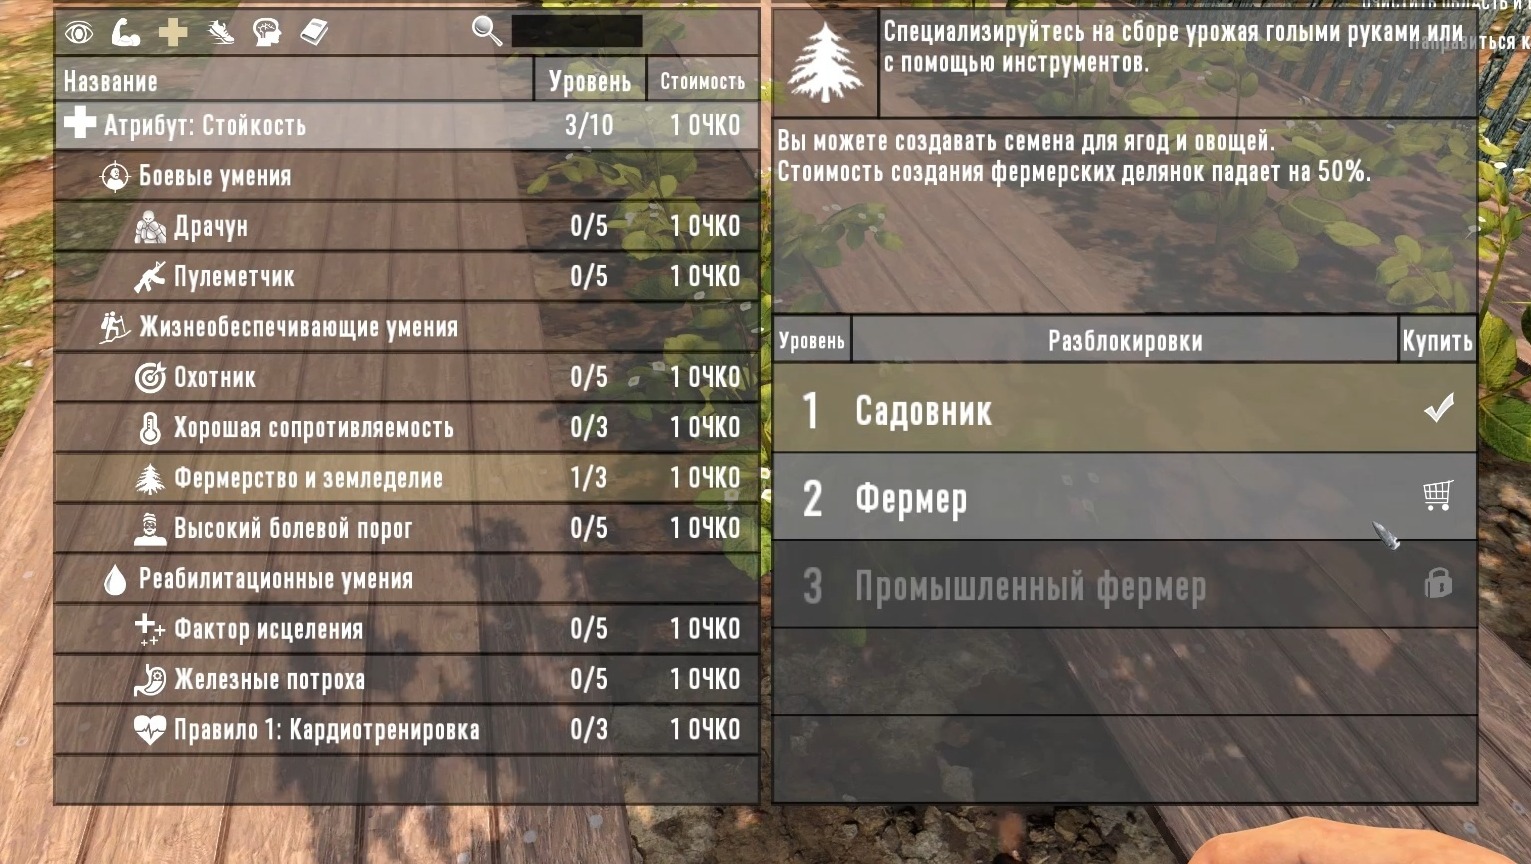 7 days to die или rust фото 91